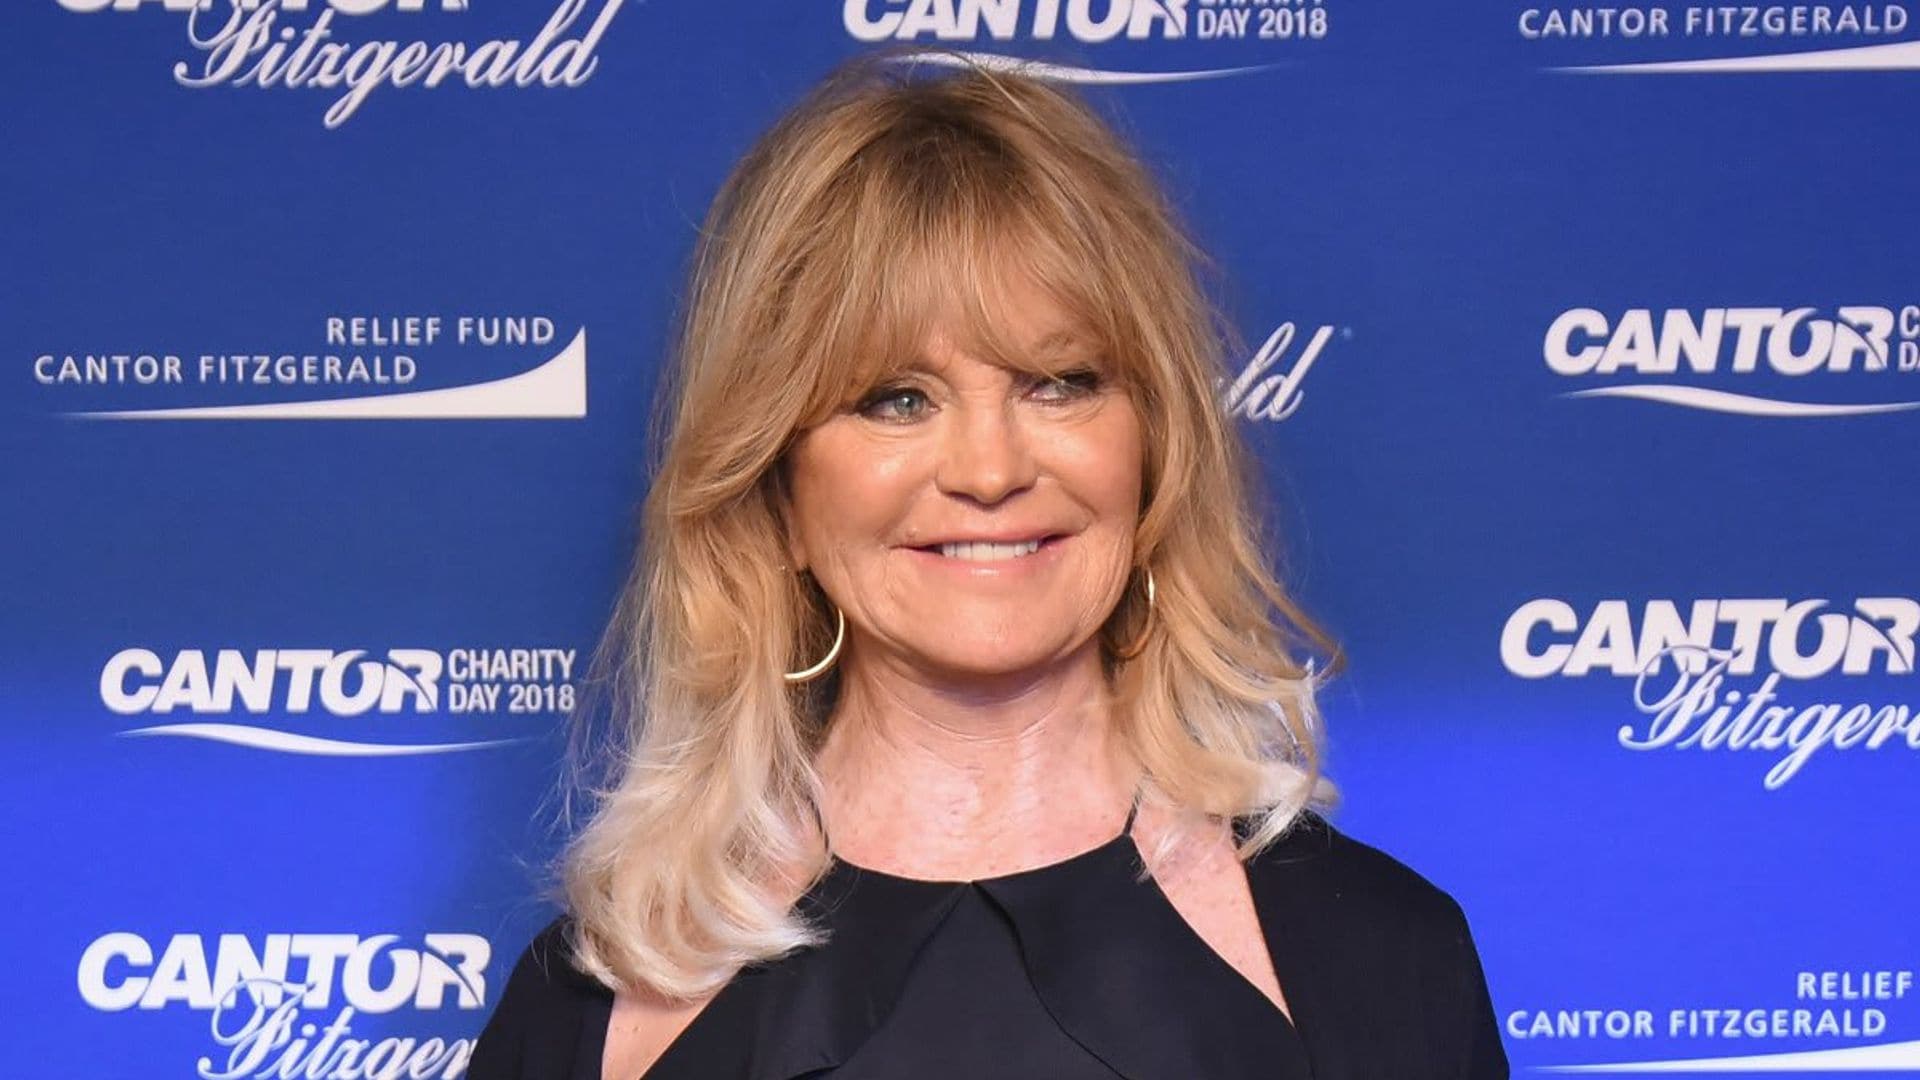 Goldie Hawn proves age is just a number as she dances to ABBA’s “Mamma Mia”